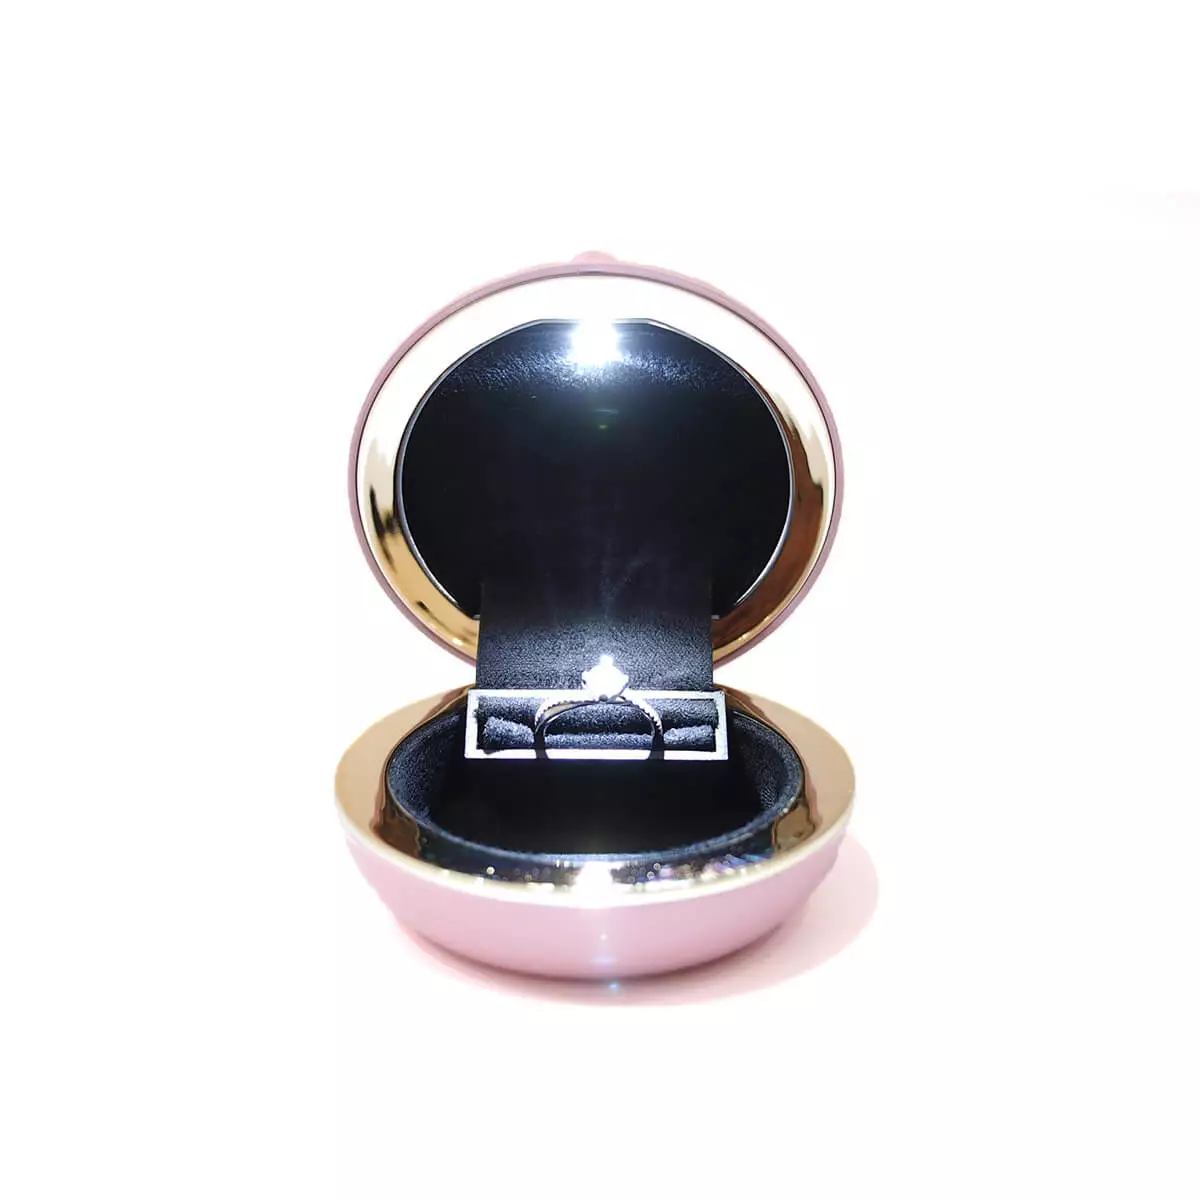 aspen ring box in pink opening